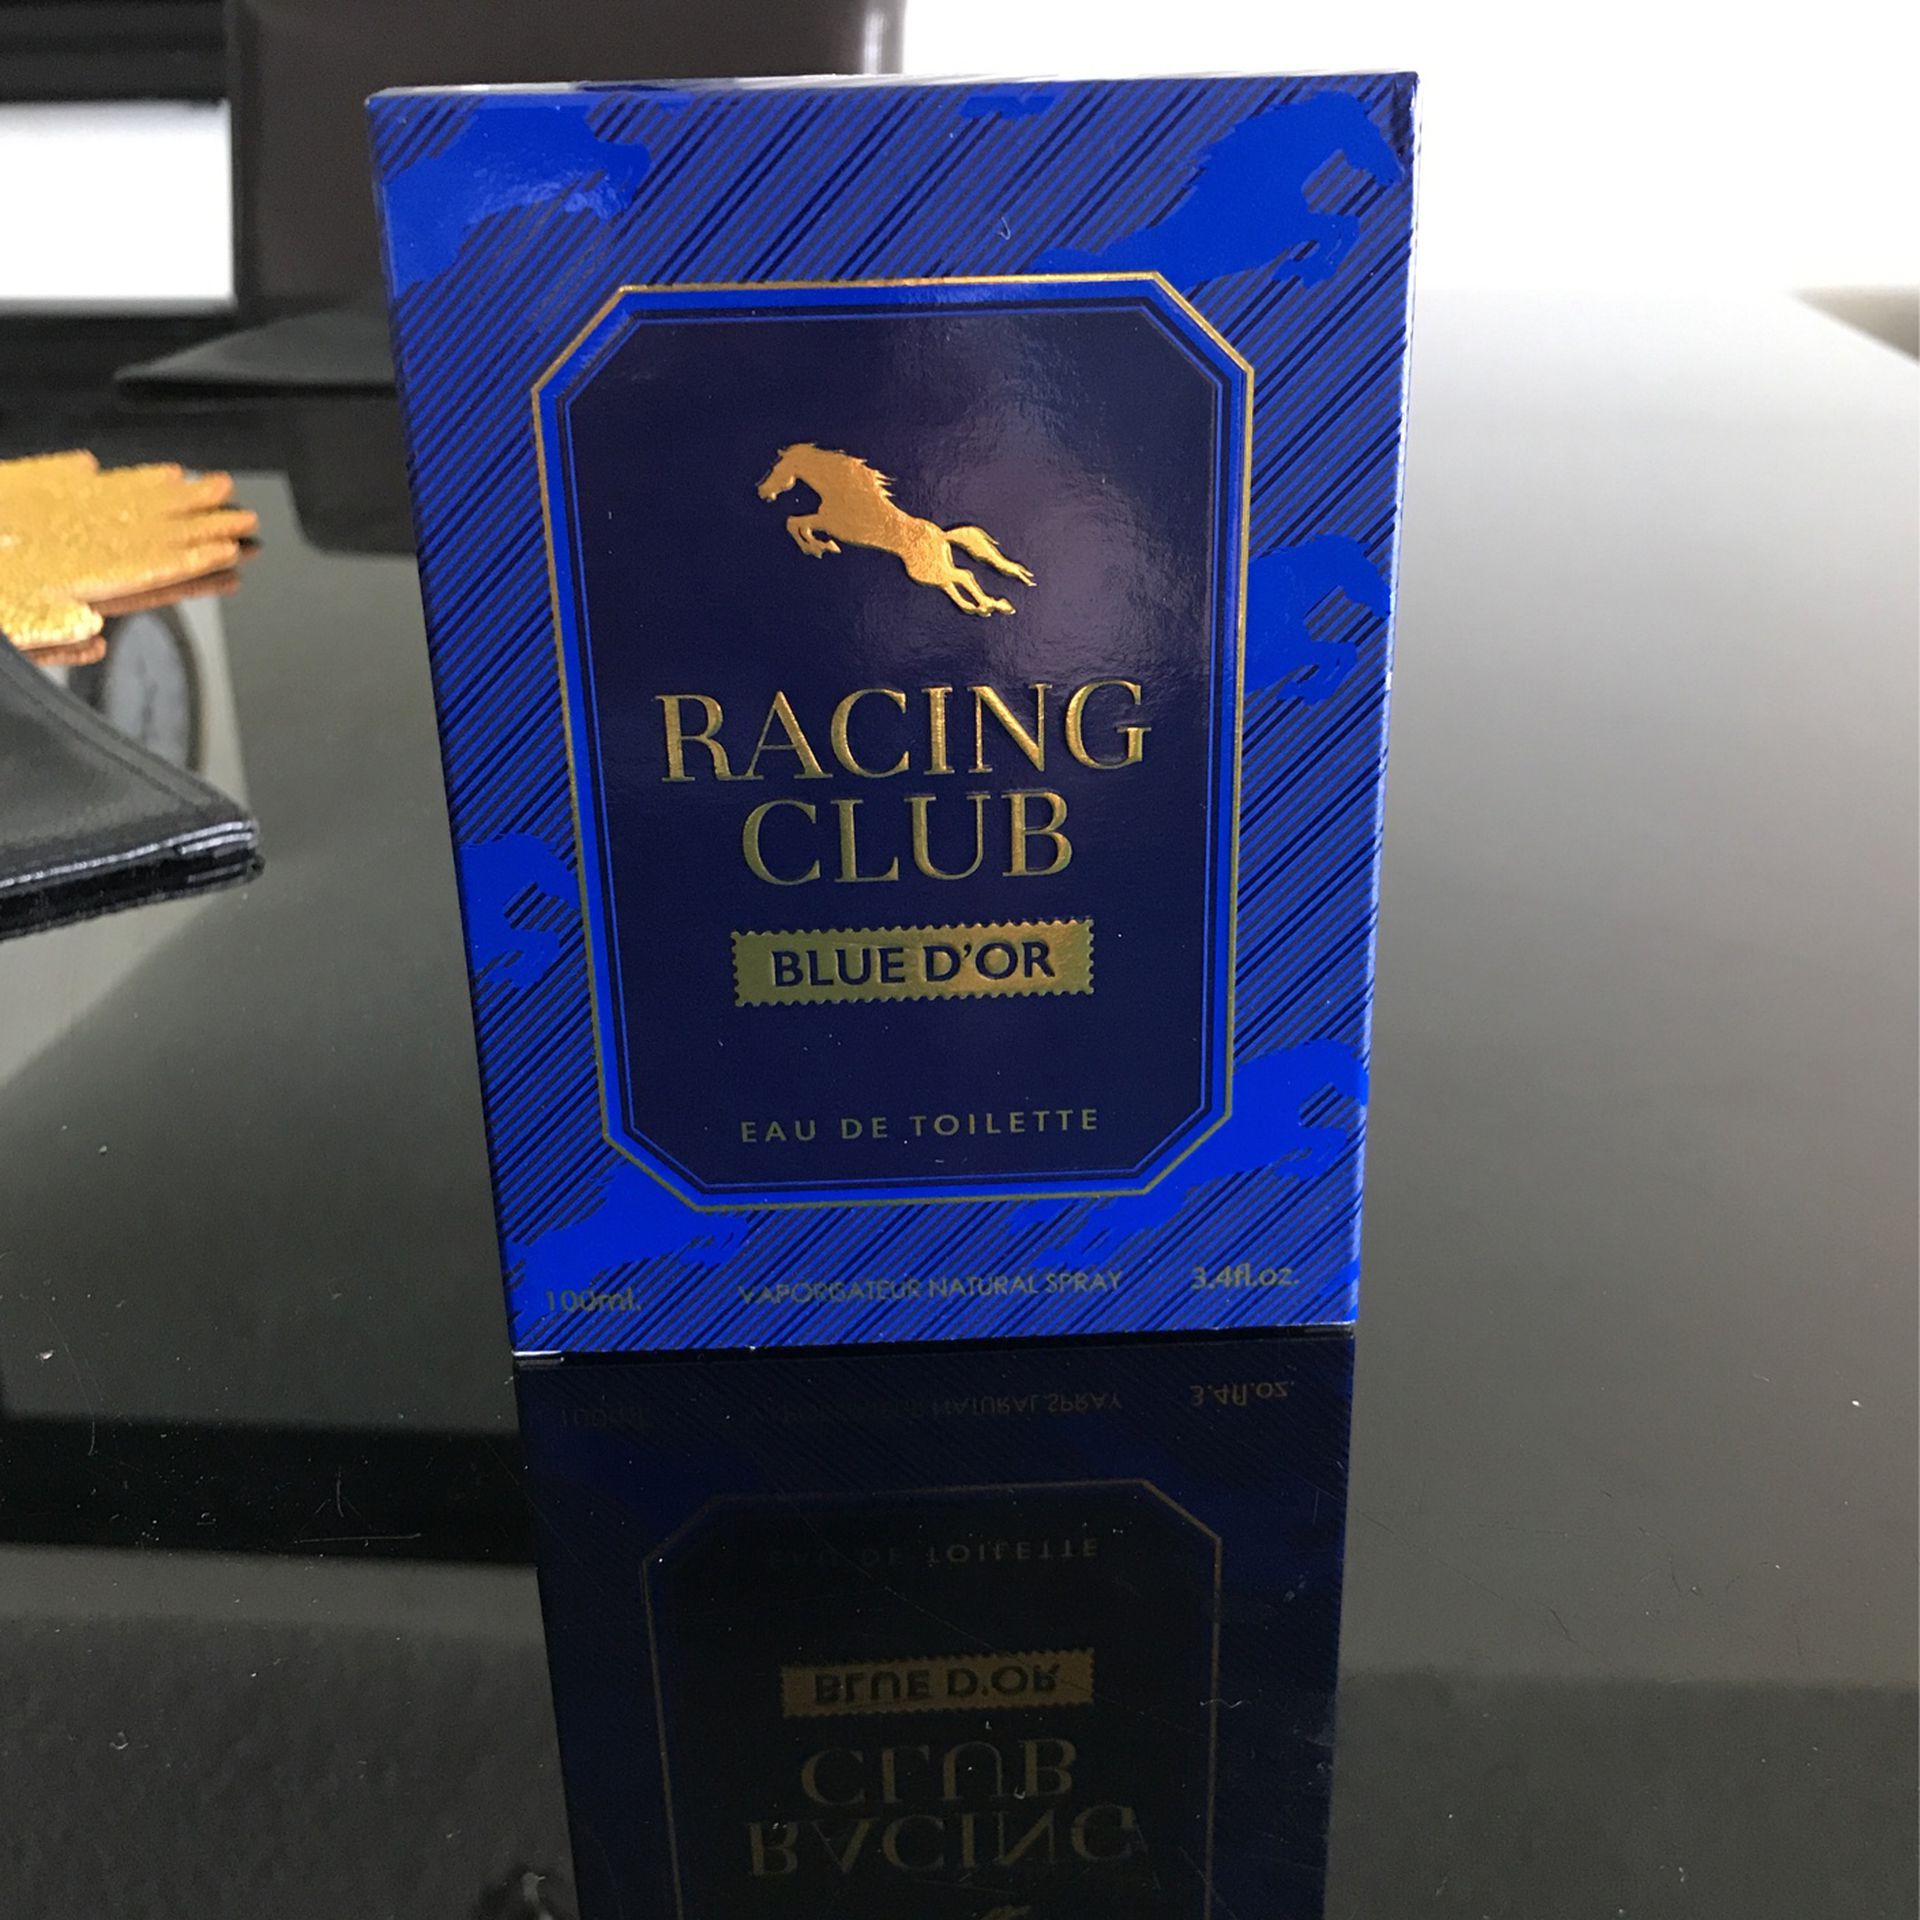  Racing Club Blue Cologne 3.4 fl. oz. EDT For Men By Mirage  Brands Spray Fragrance